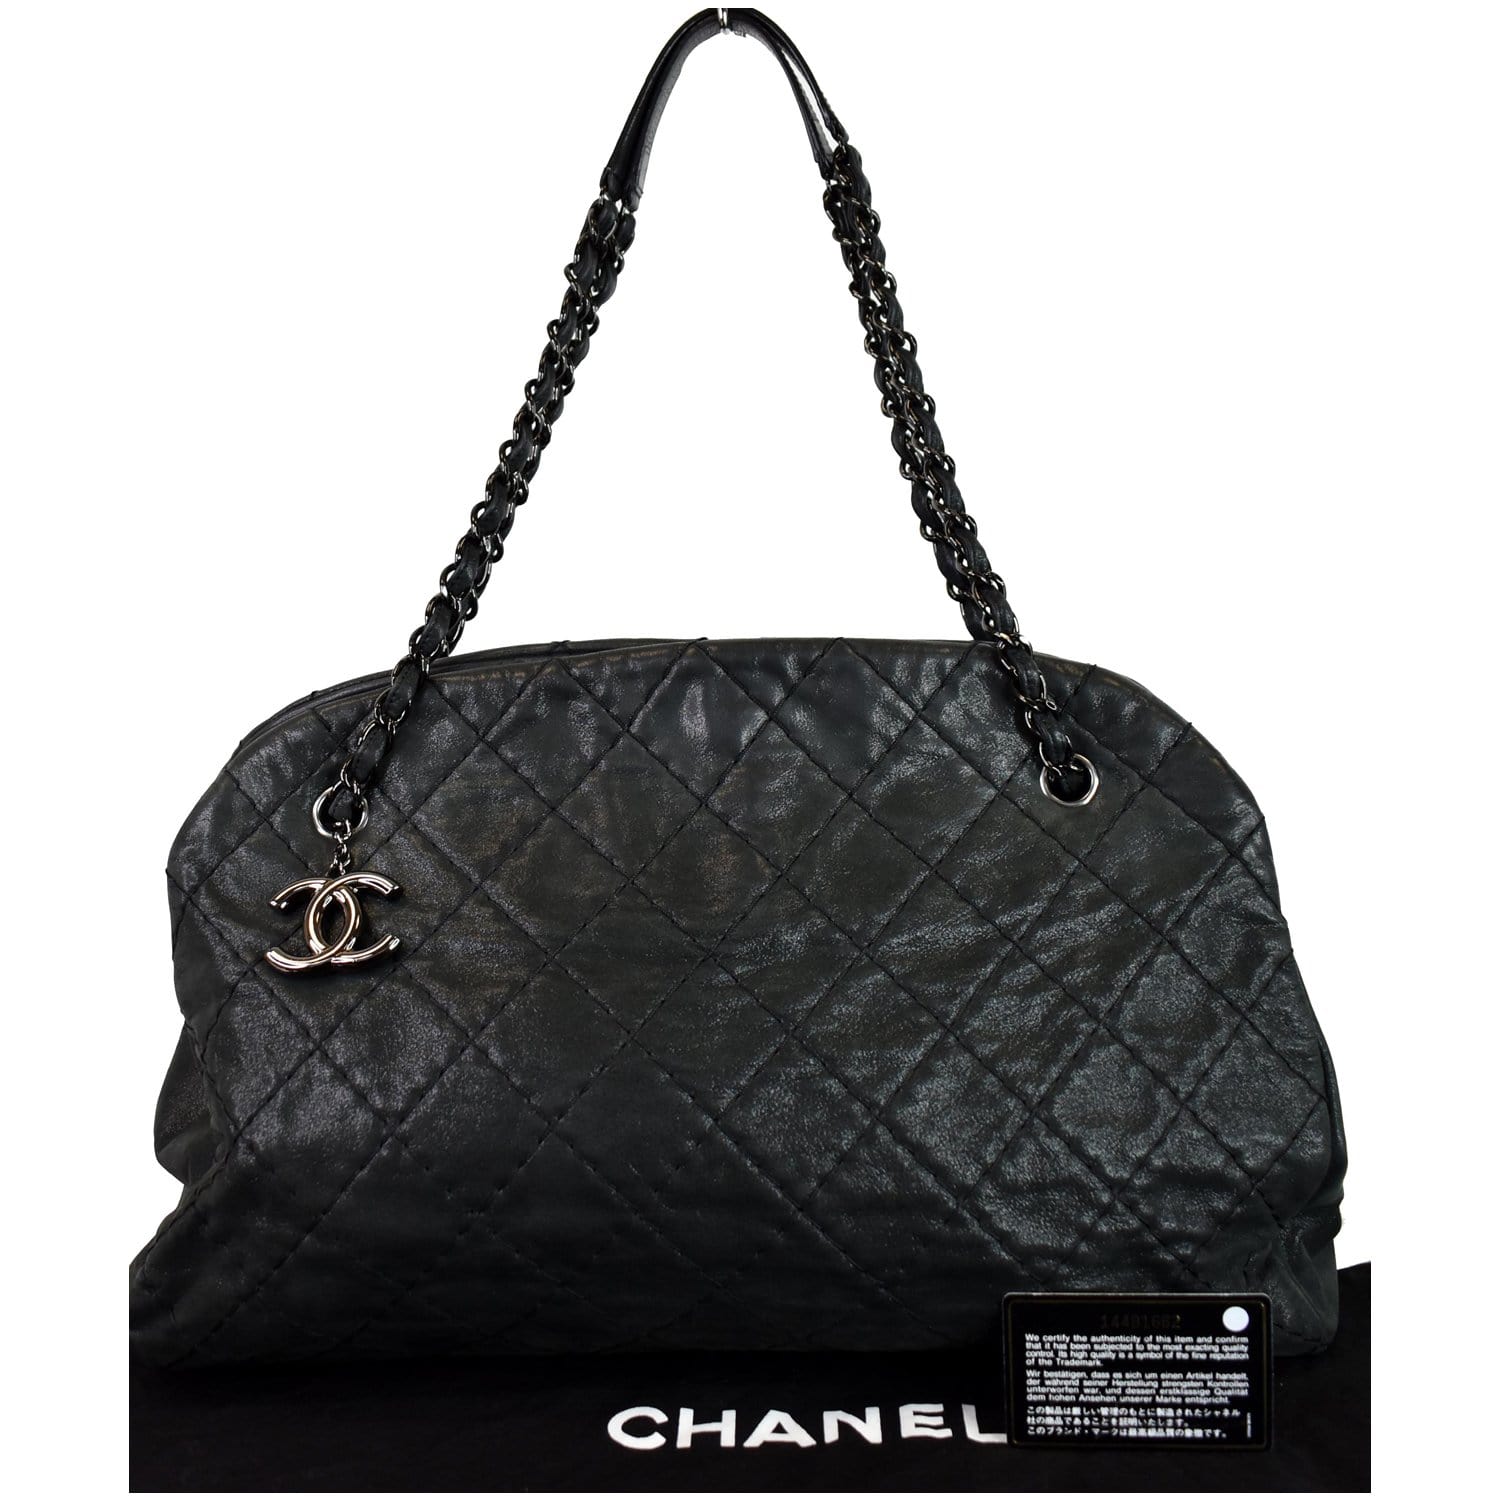 Chanel reference chart  Vintage chanel bag, Fashion, Channel bags